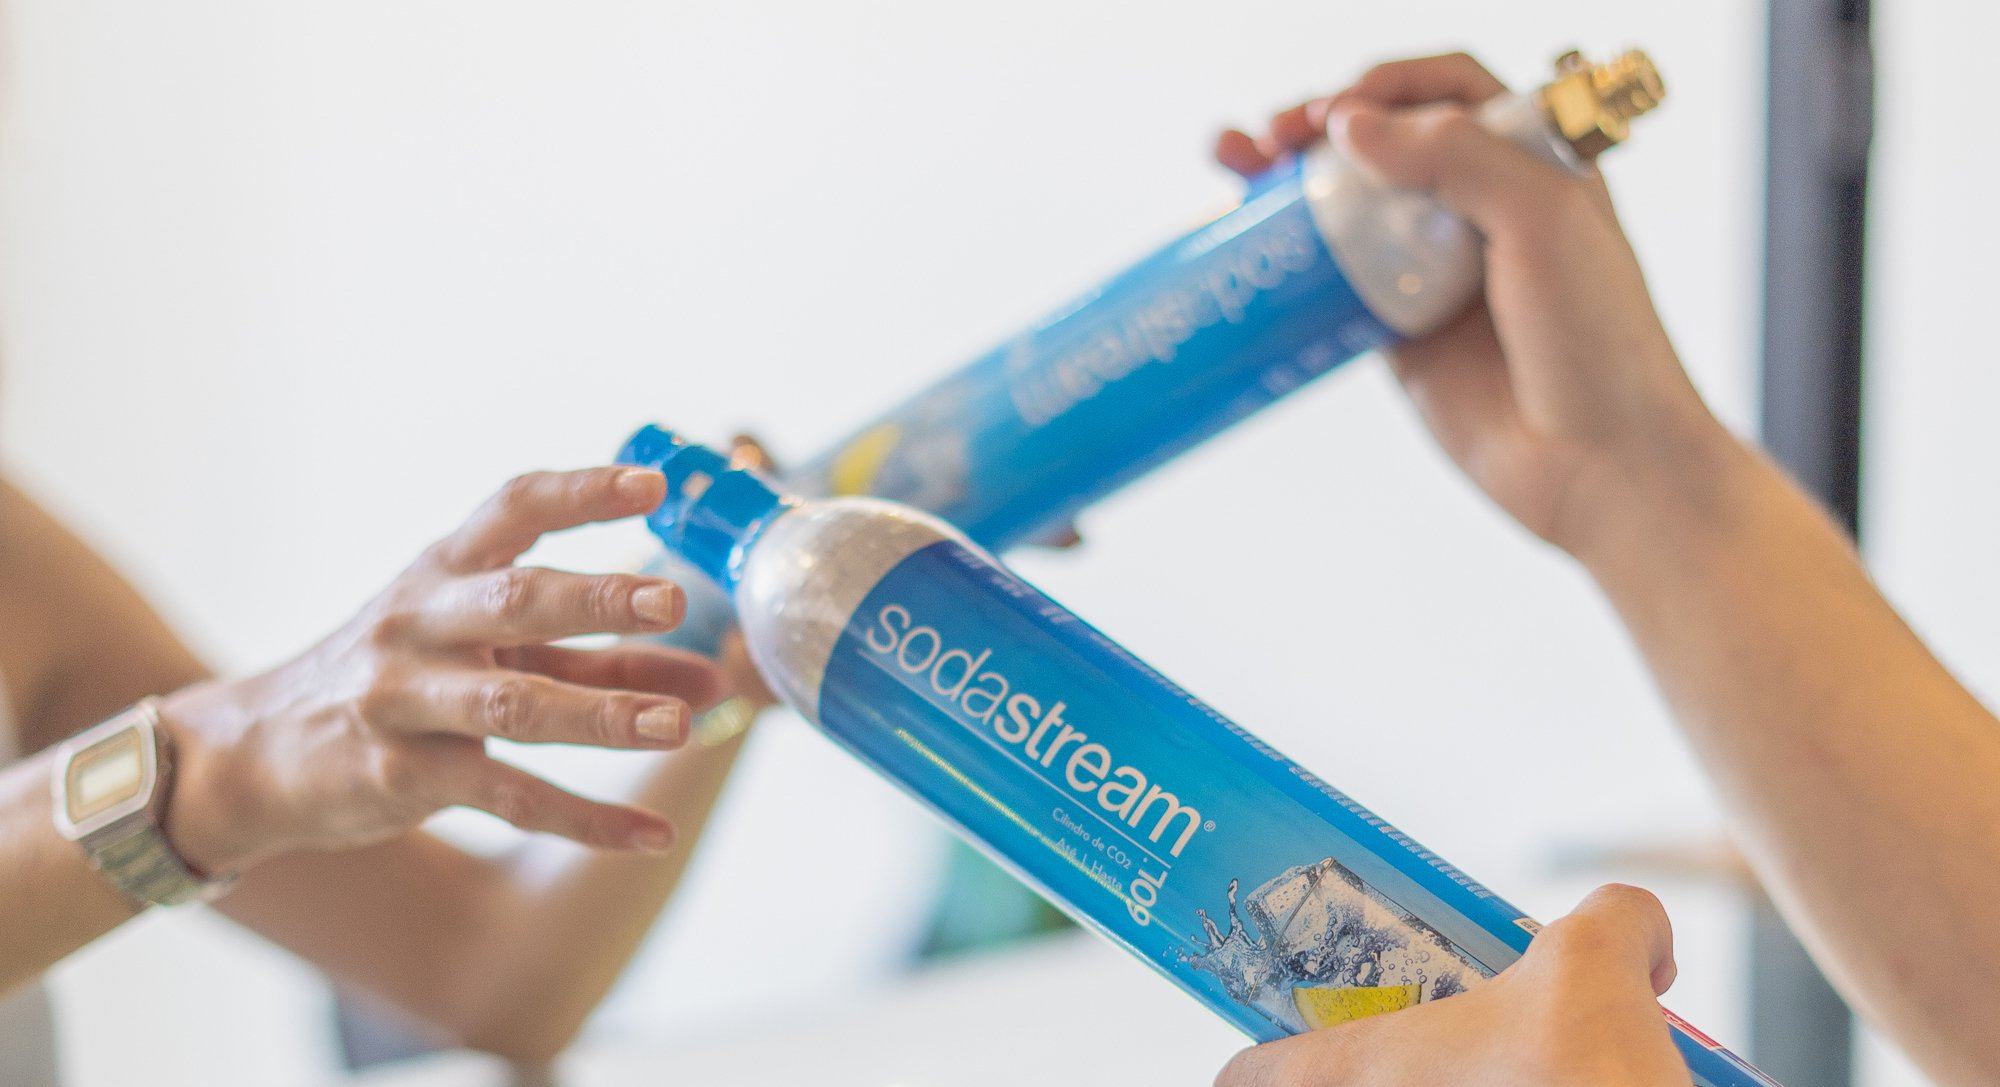 exchanging and refilling your SodaStream CO2 cylinders online is as easy as 1-2-3